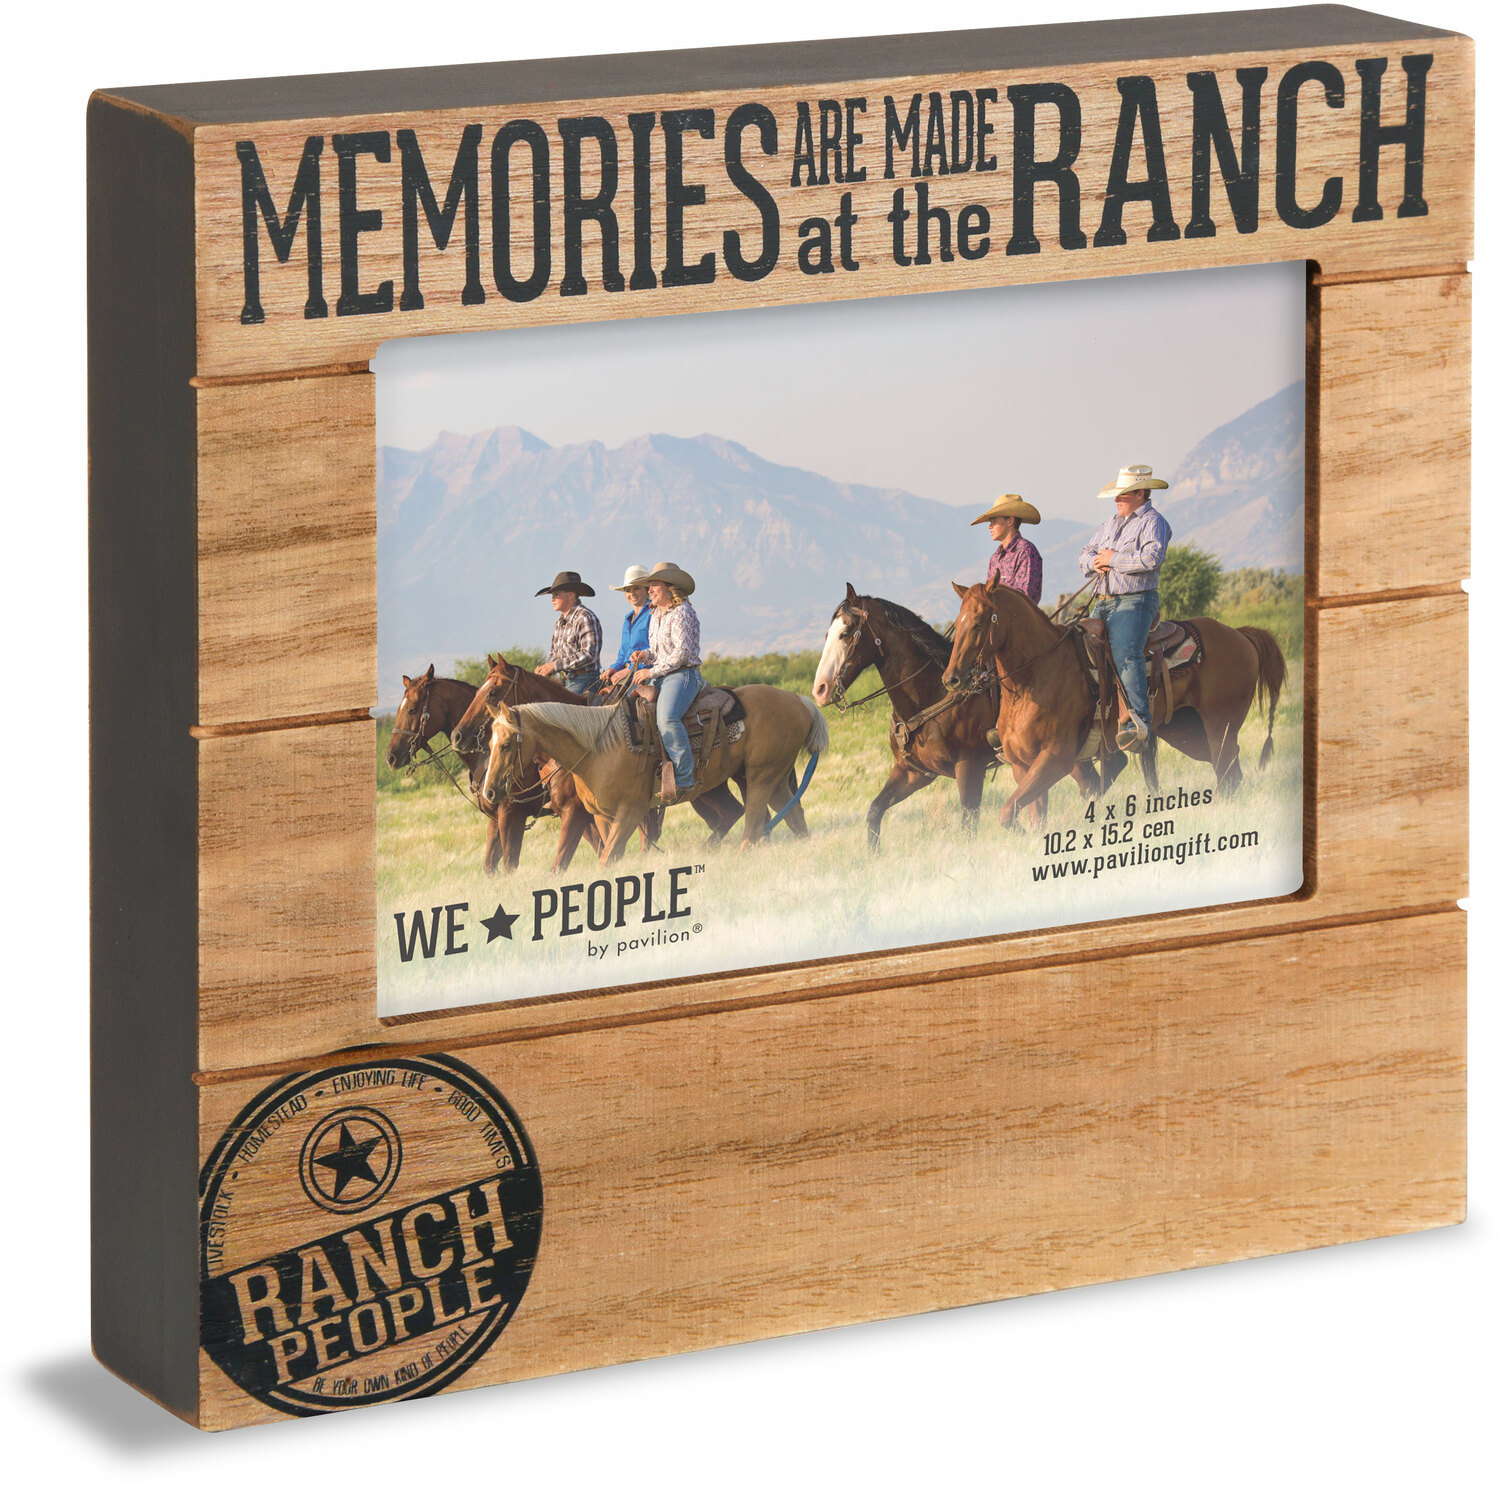 Ranch People by We People - Ranch People - 6.75" x 7.5" Frame (Holds 4" x 6" photo)